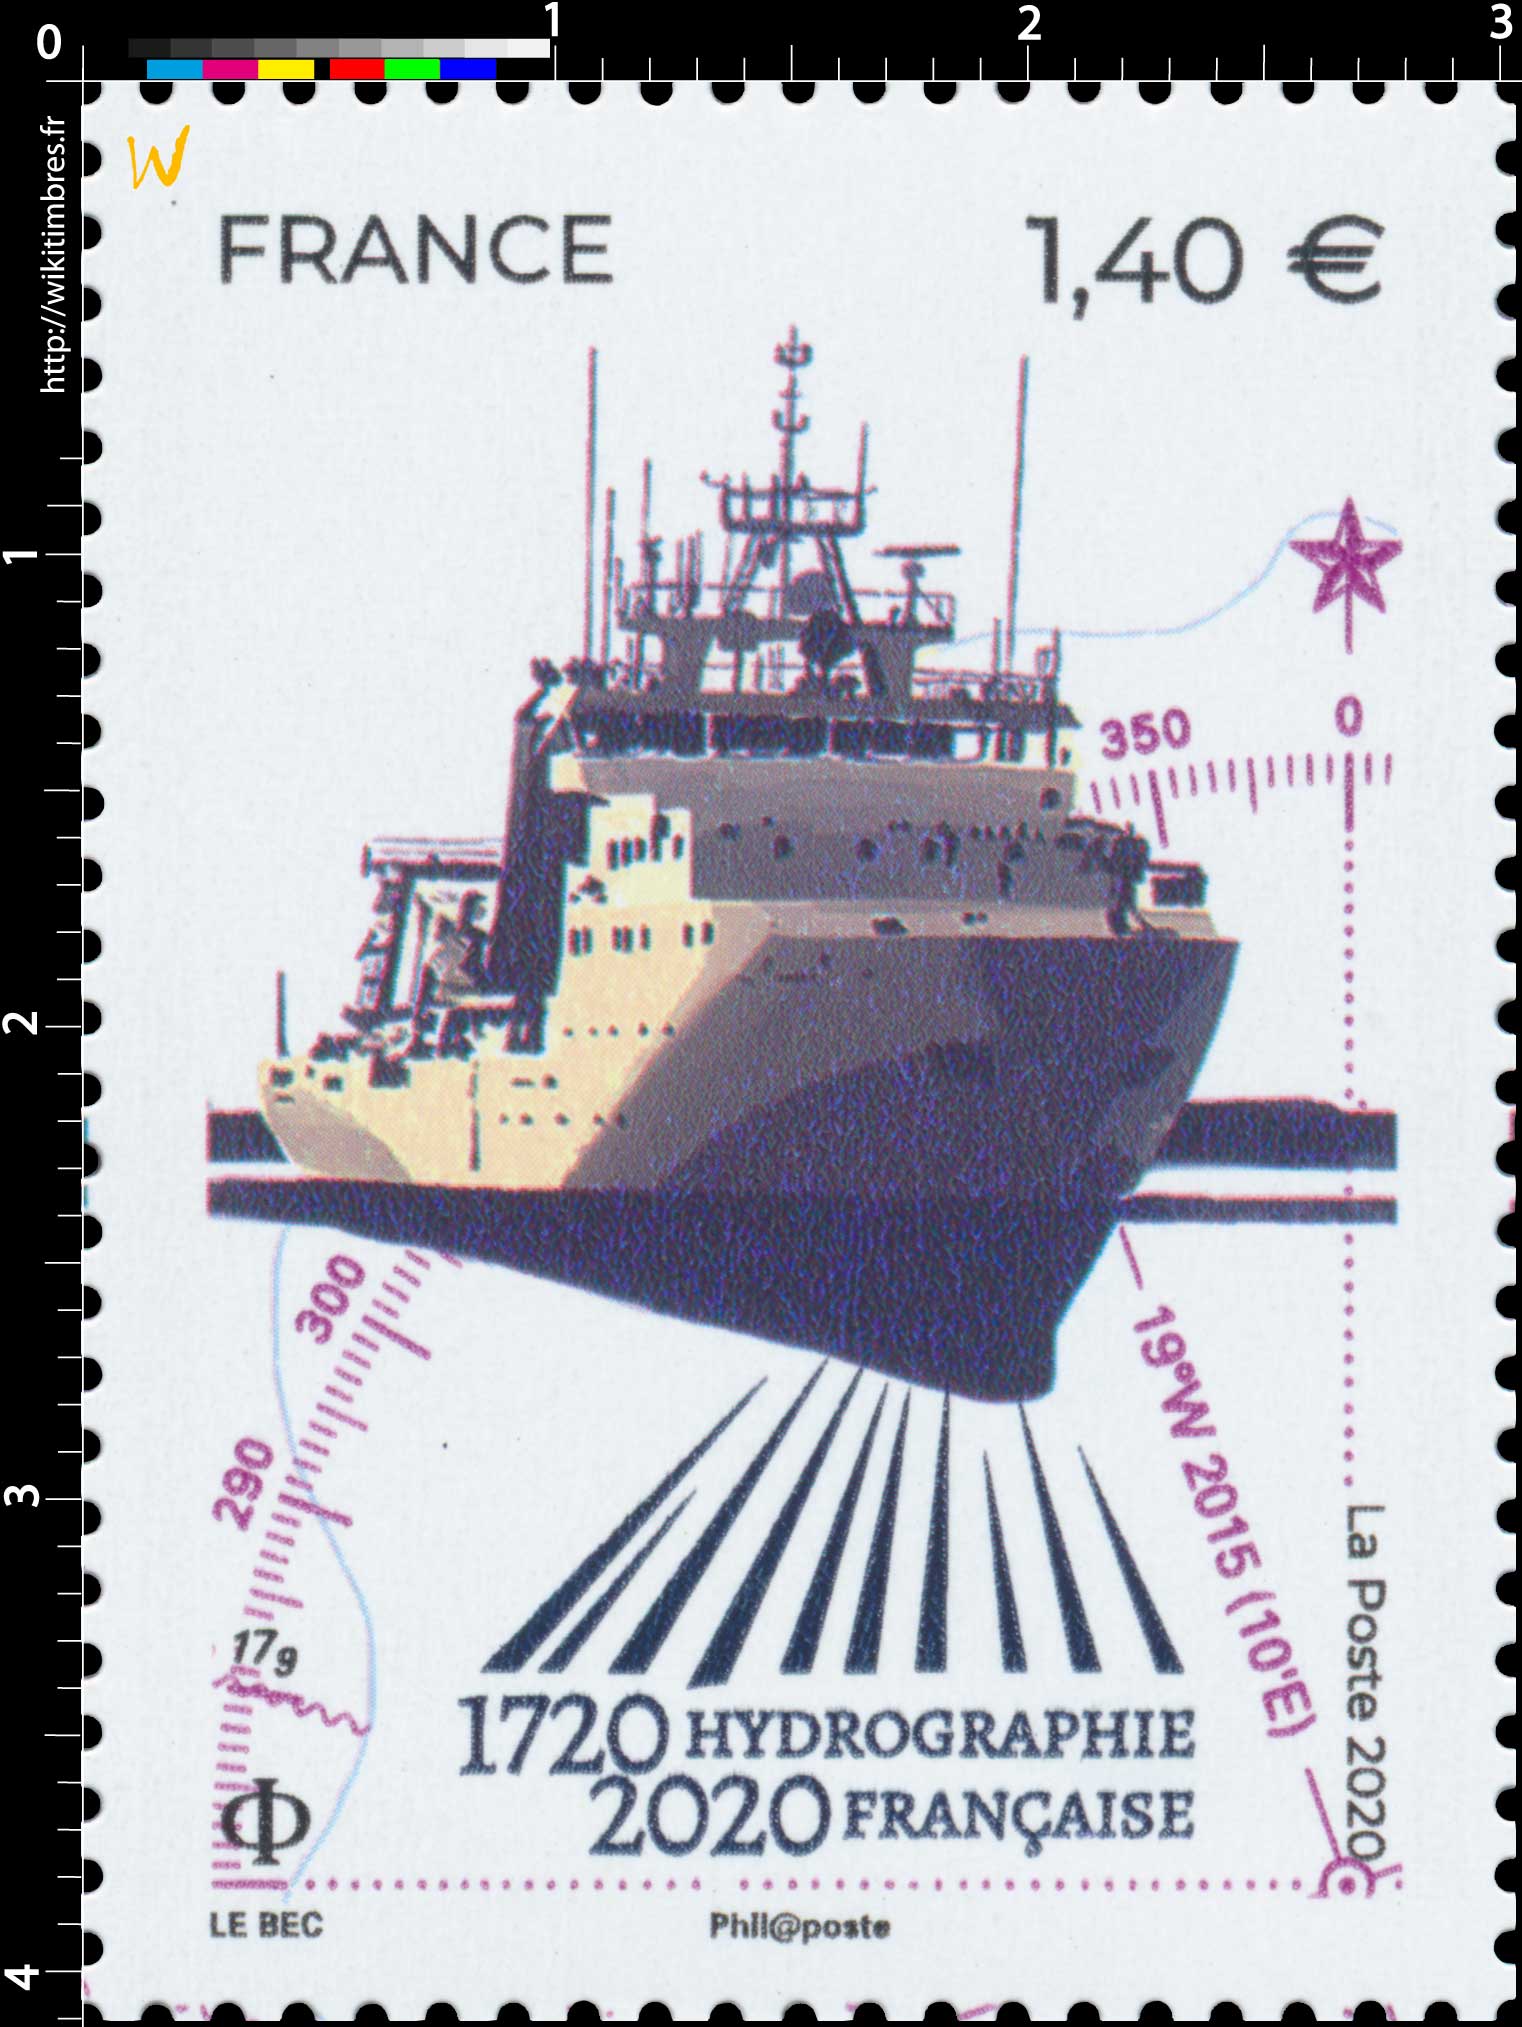 2020 1720 HYDROGRAPHIE FRANCAISE